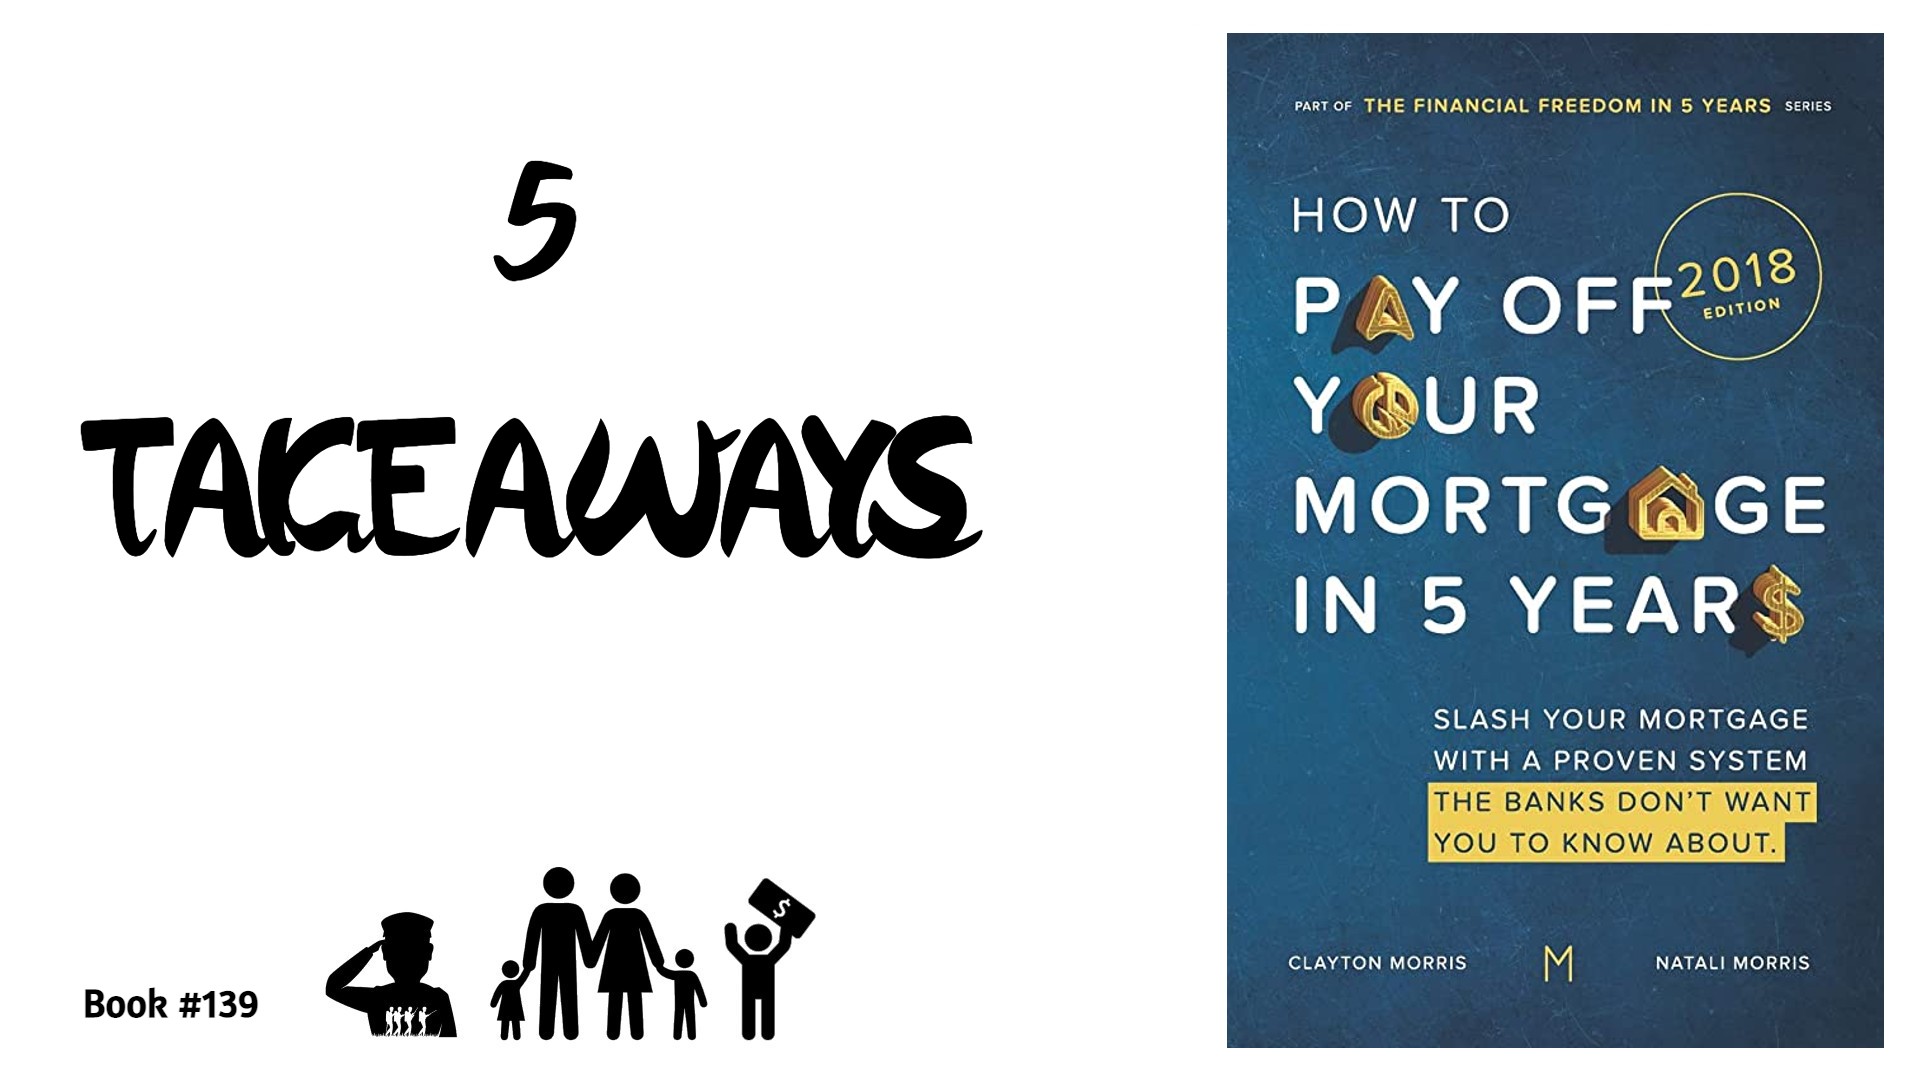 5 Takeaways from “How to Pay Off Your Mortgage in Five Years”